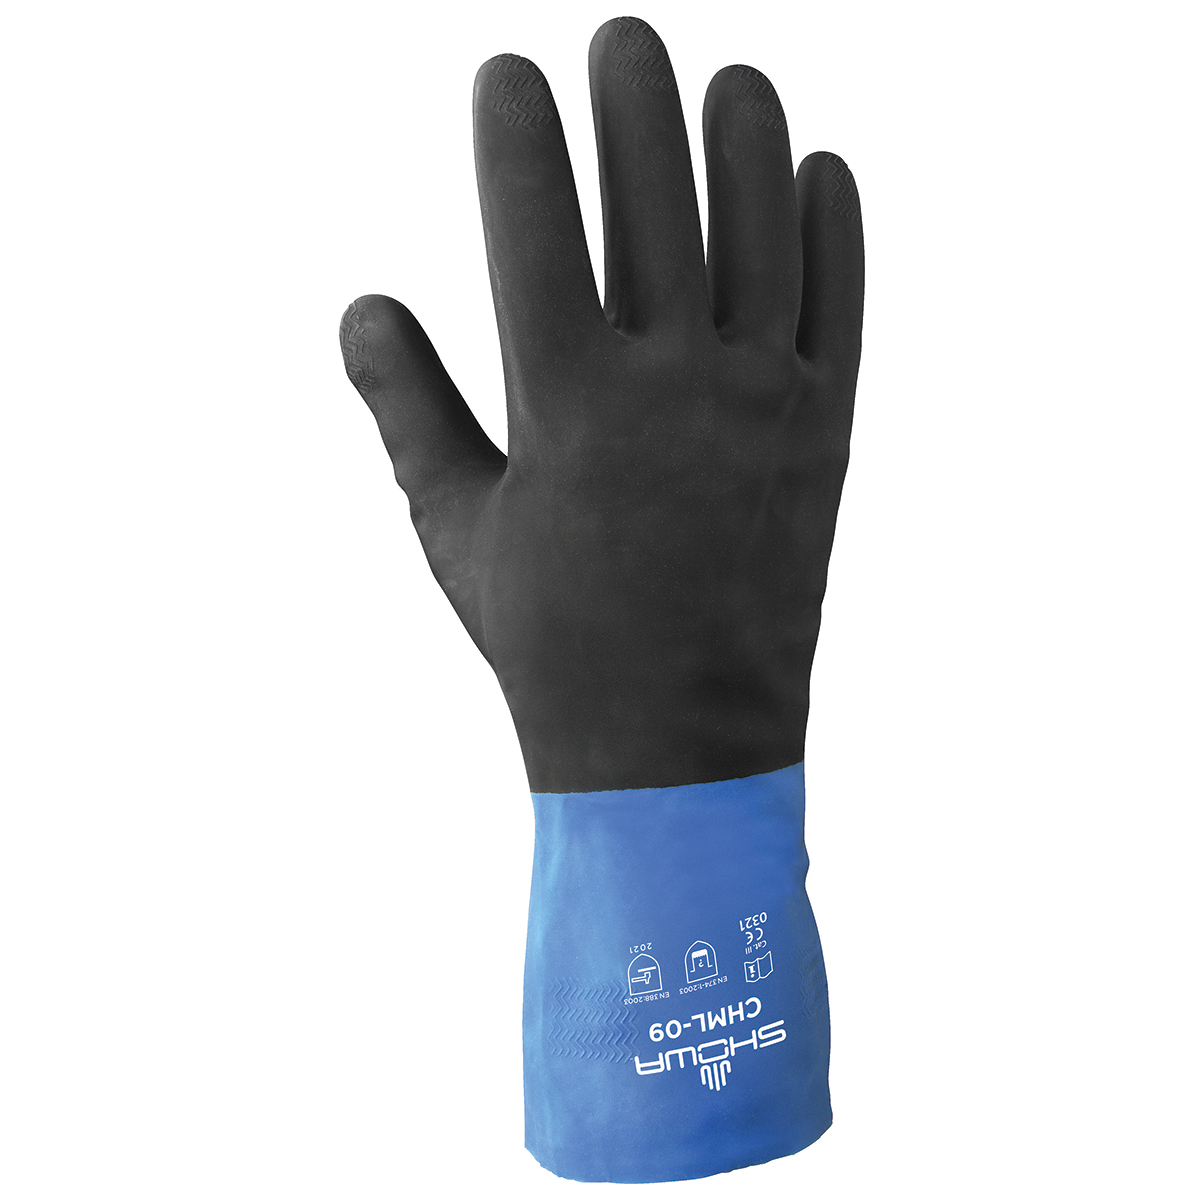 Chemical resistant, neoprene-over-natural rubber latex, unsupported, 12", 26-mil, flock lined, black over blue safety feature, medium